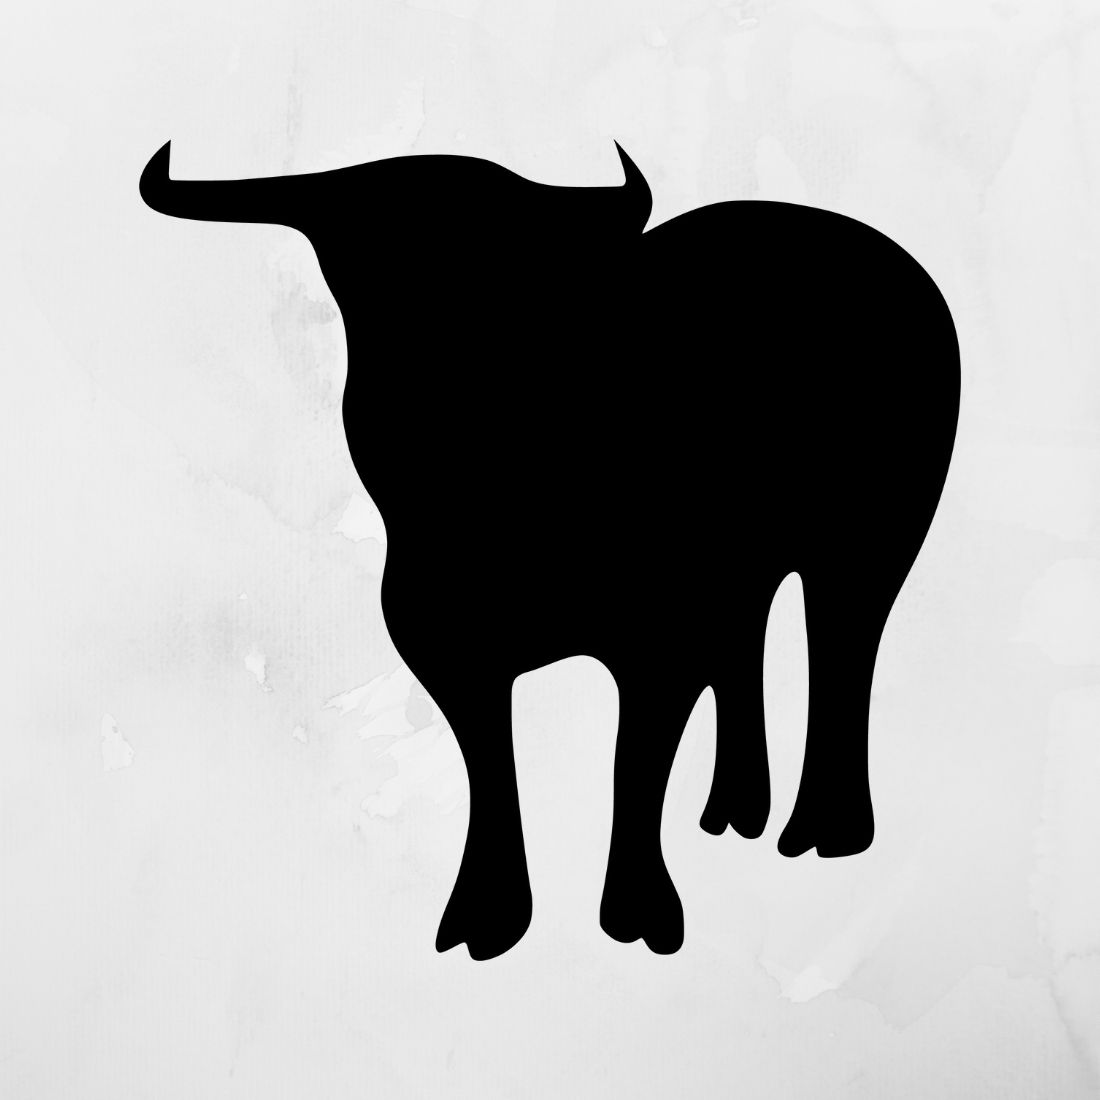 Silhouette of an elephant on a white background.